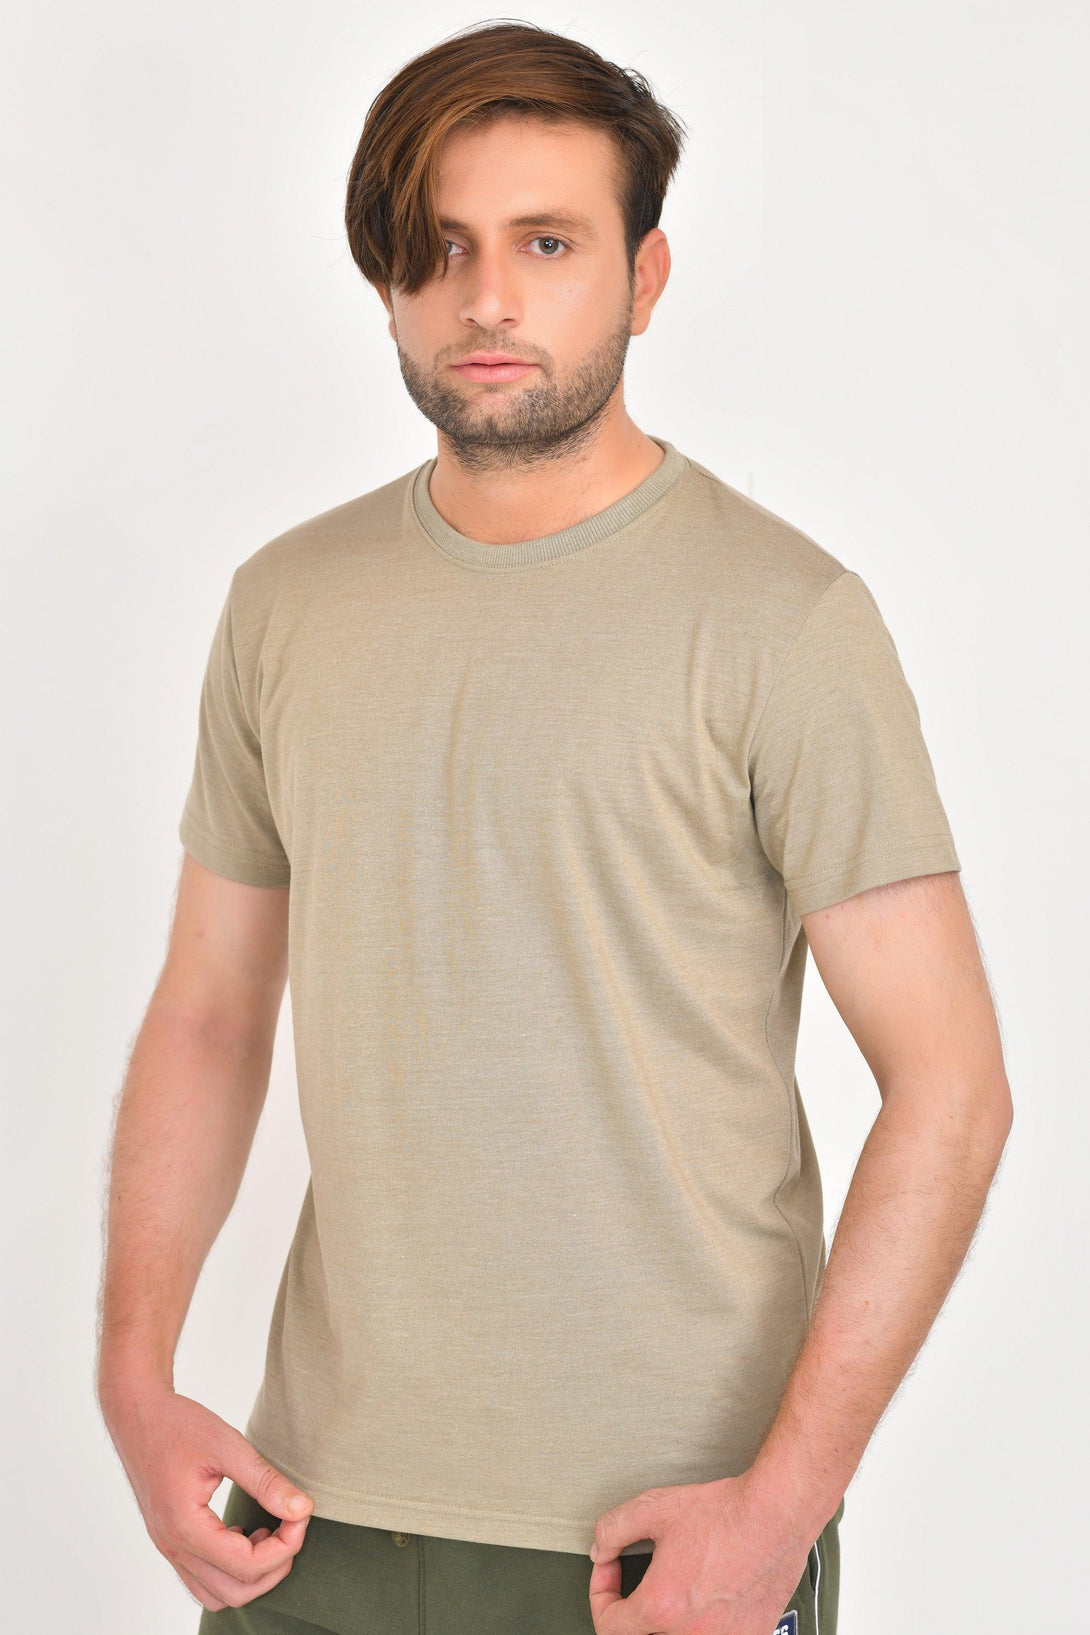 Round Neck T-Shirts | LAGOON - SLATE - STONE - Pack of 3 - FTS